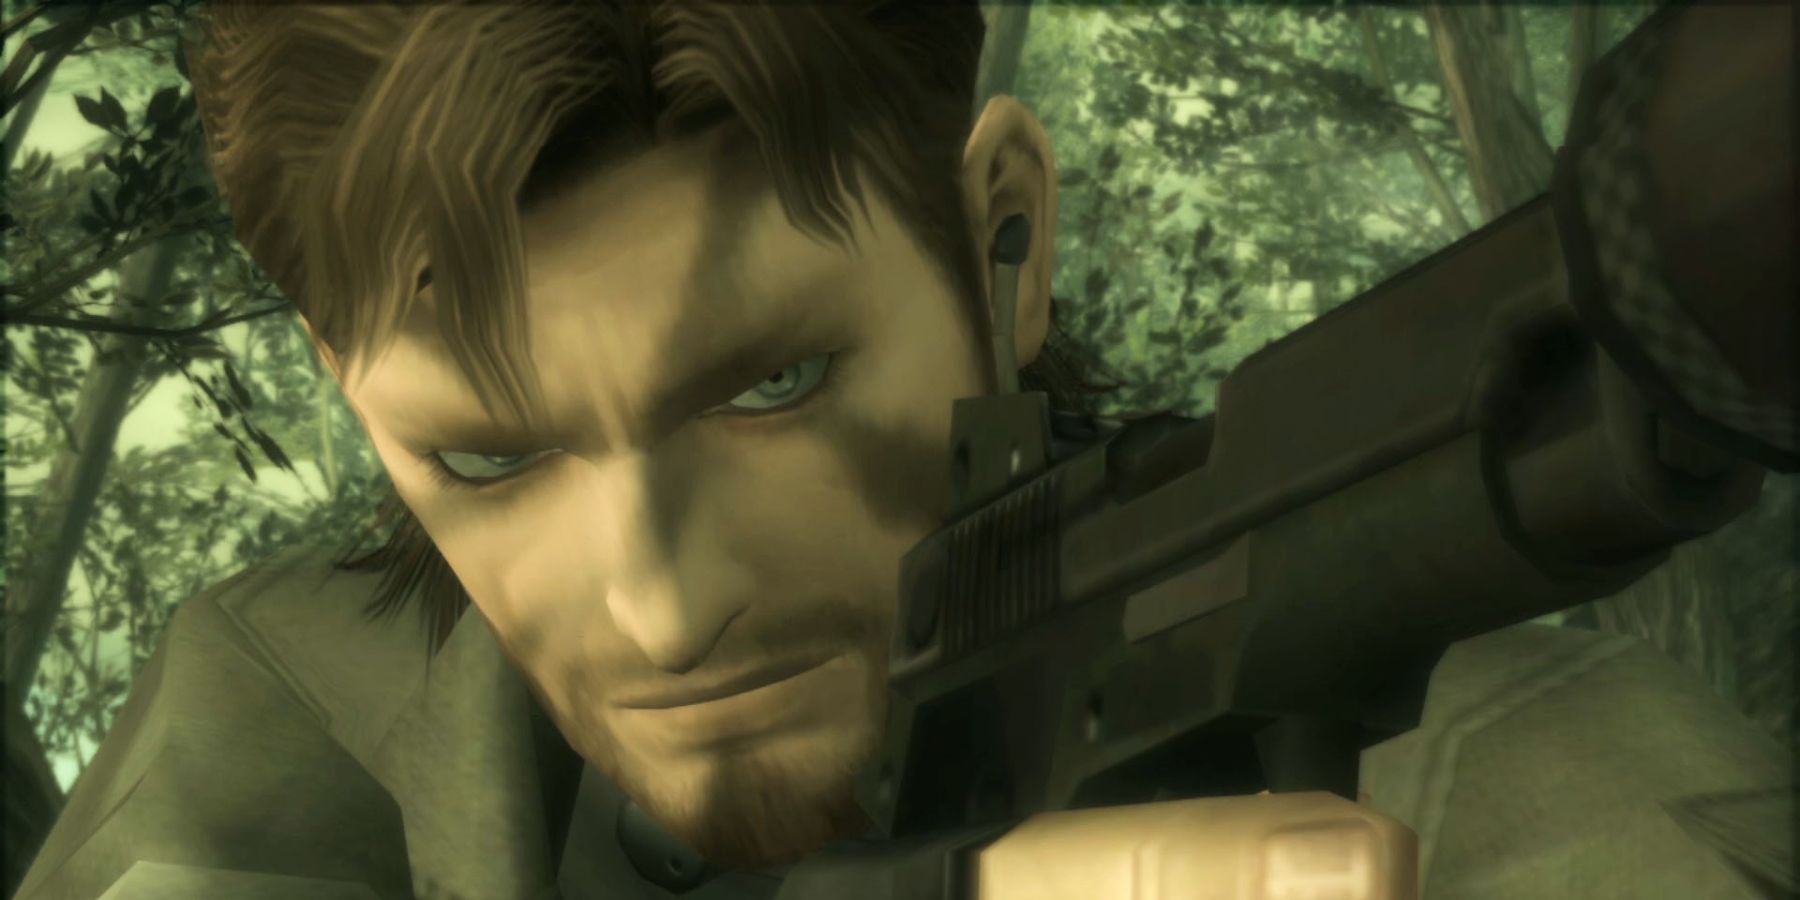 A screenshot from Metal Gear Solid 3 showing main protagonist Naked Snake.